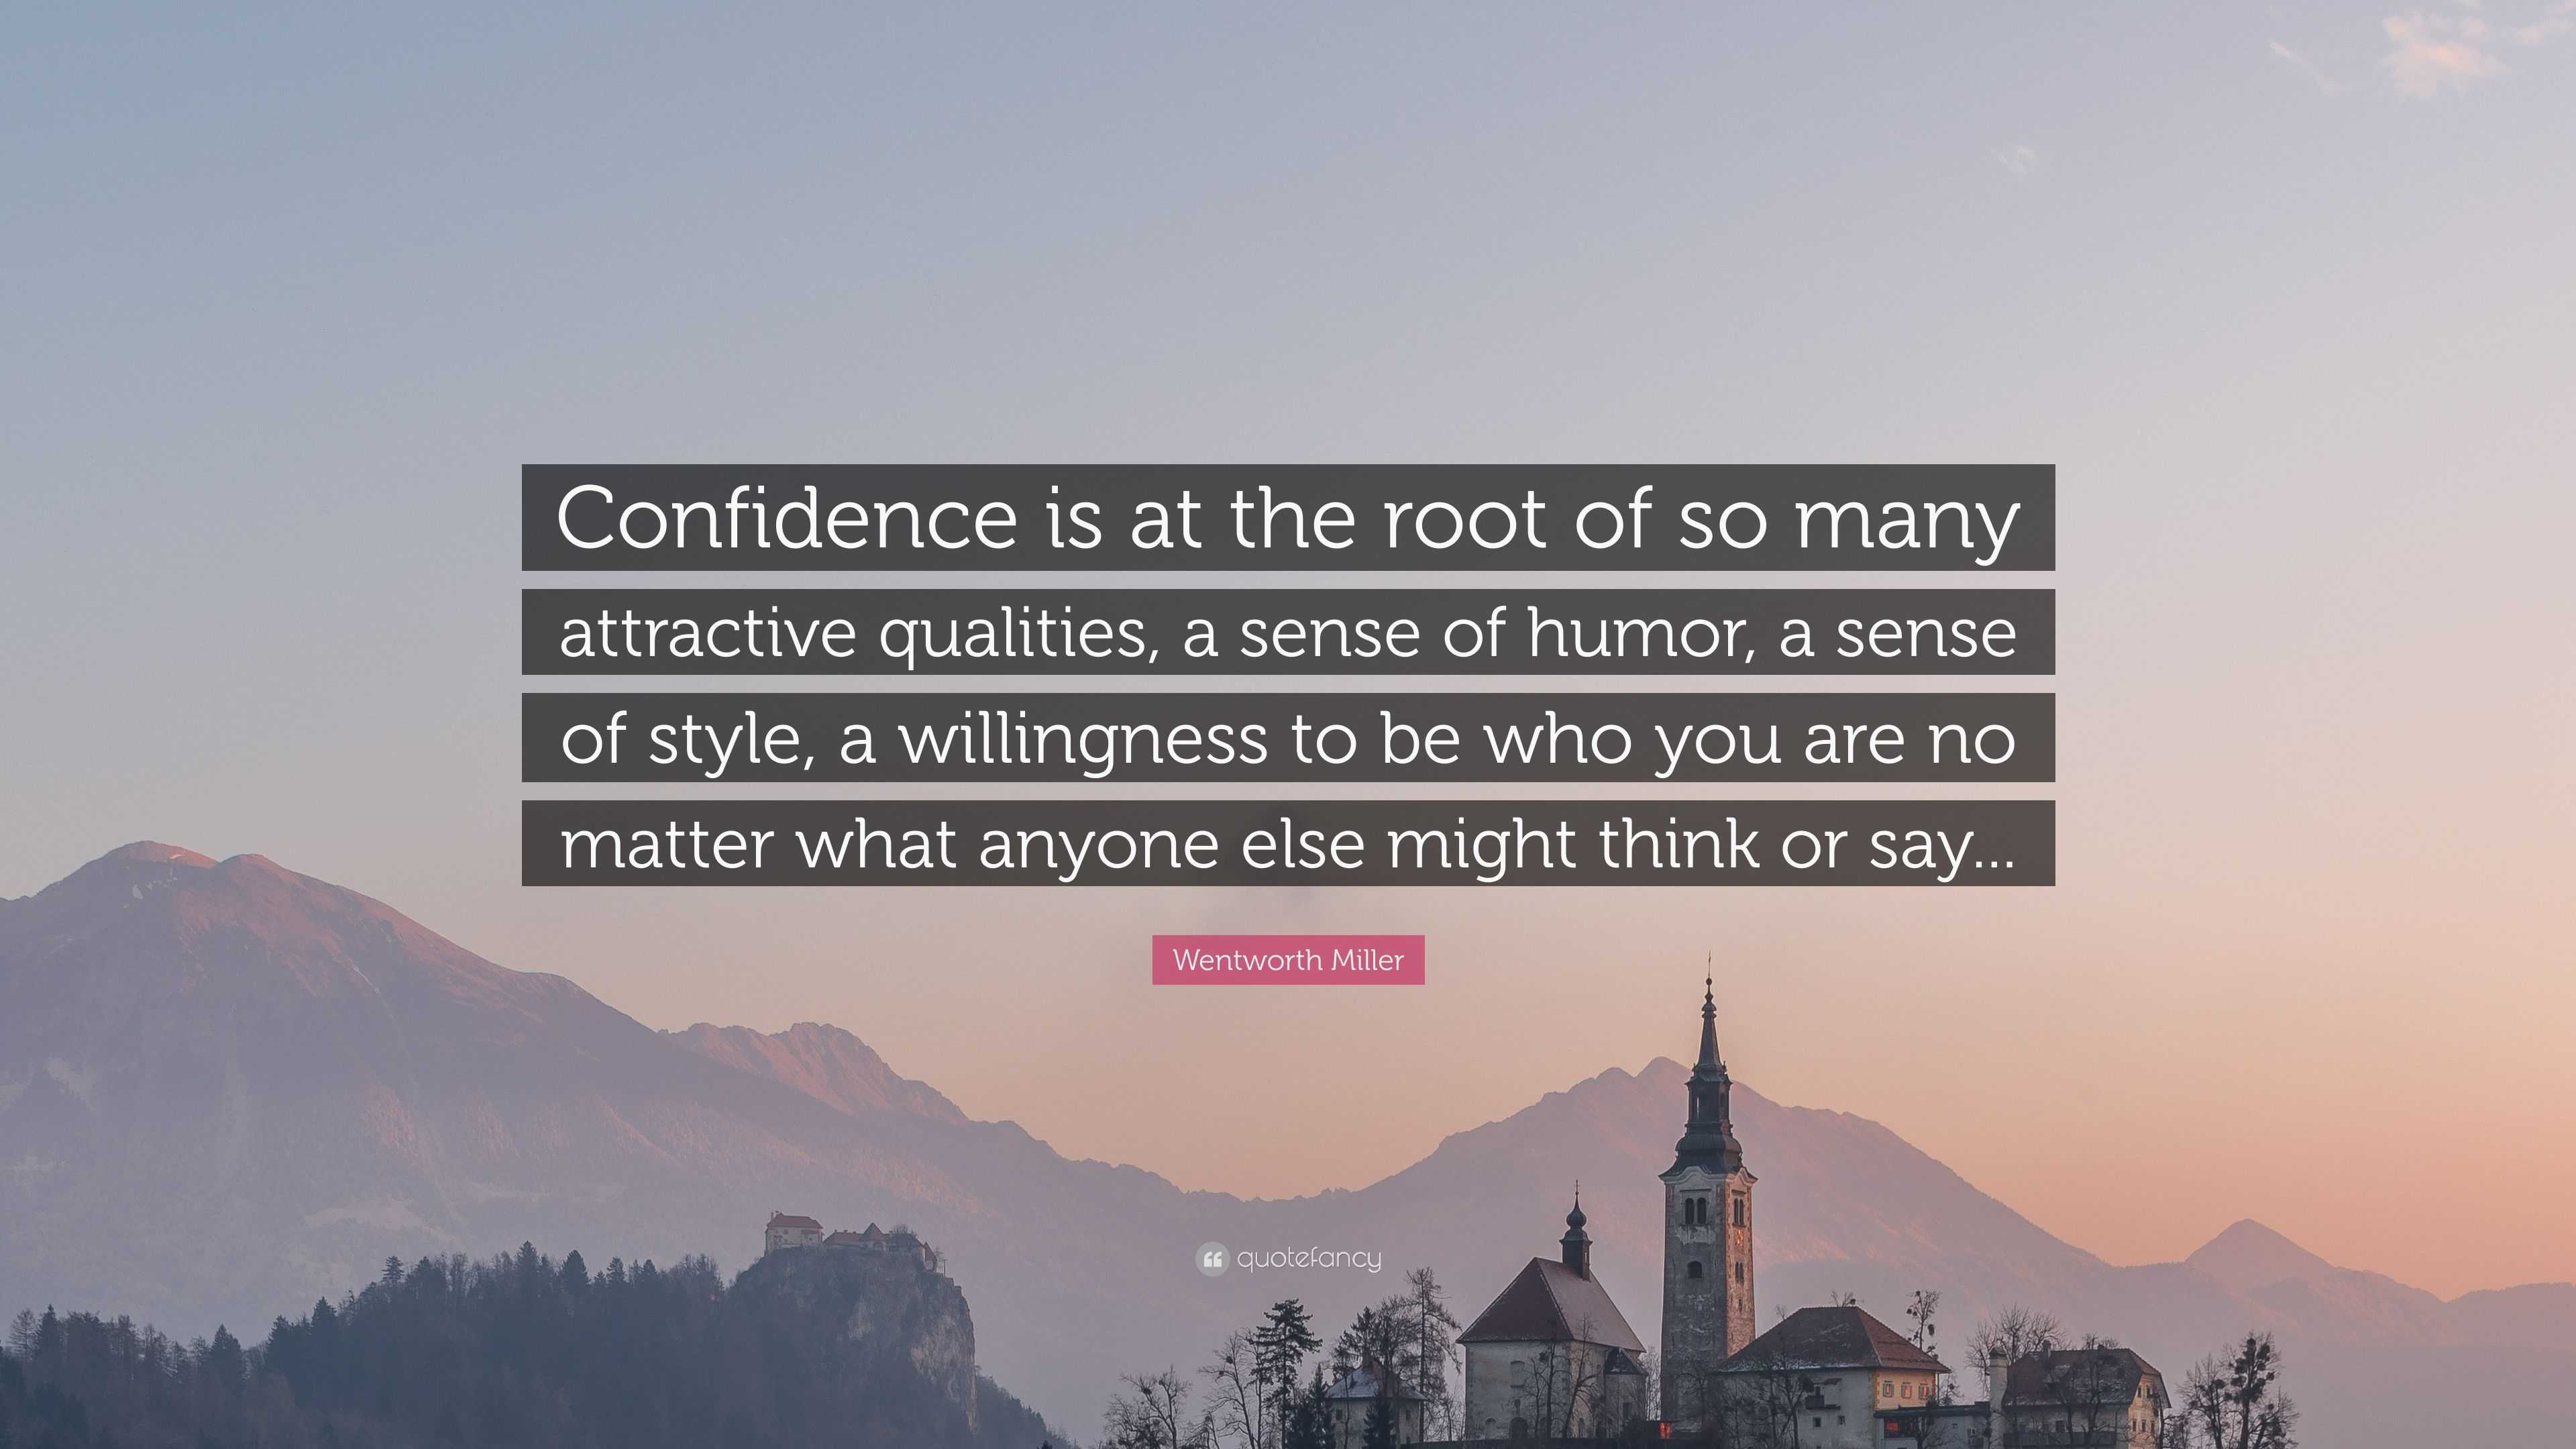 Why is confidence so attractive?